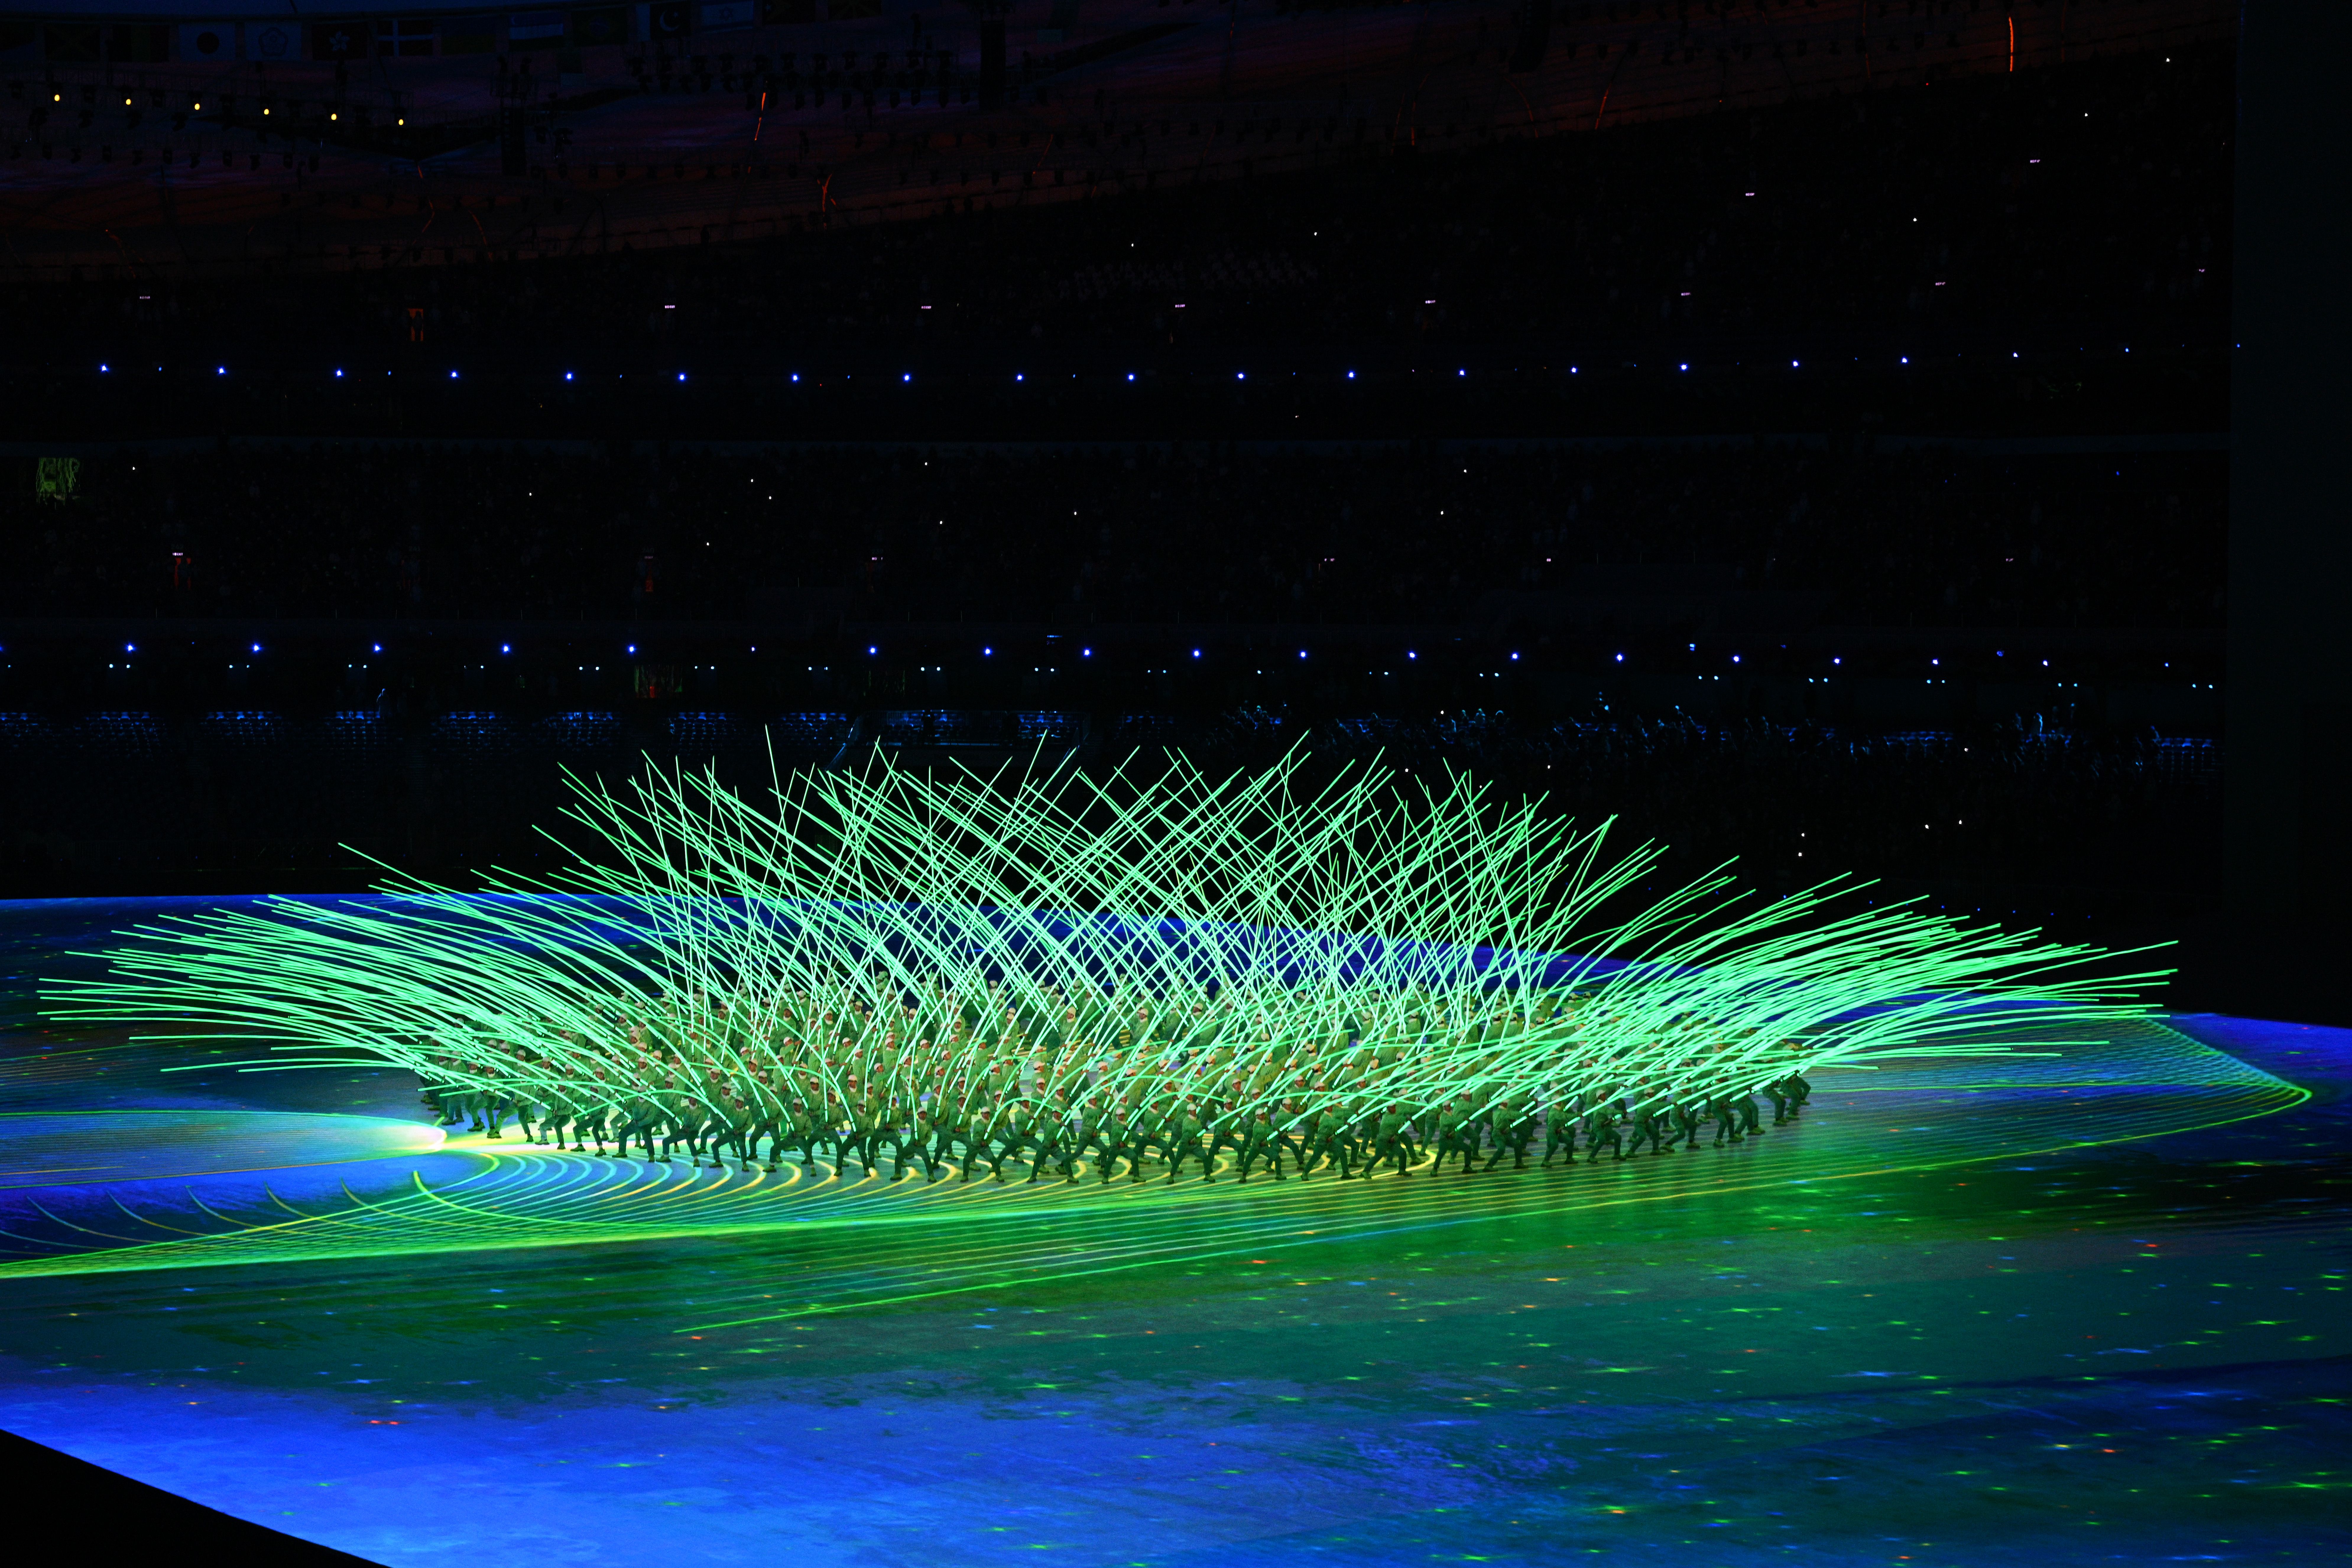 Performers create a flower display with LED lights during the Opening Ceremony of the Beijing 2022 Winter Olympics.